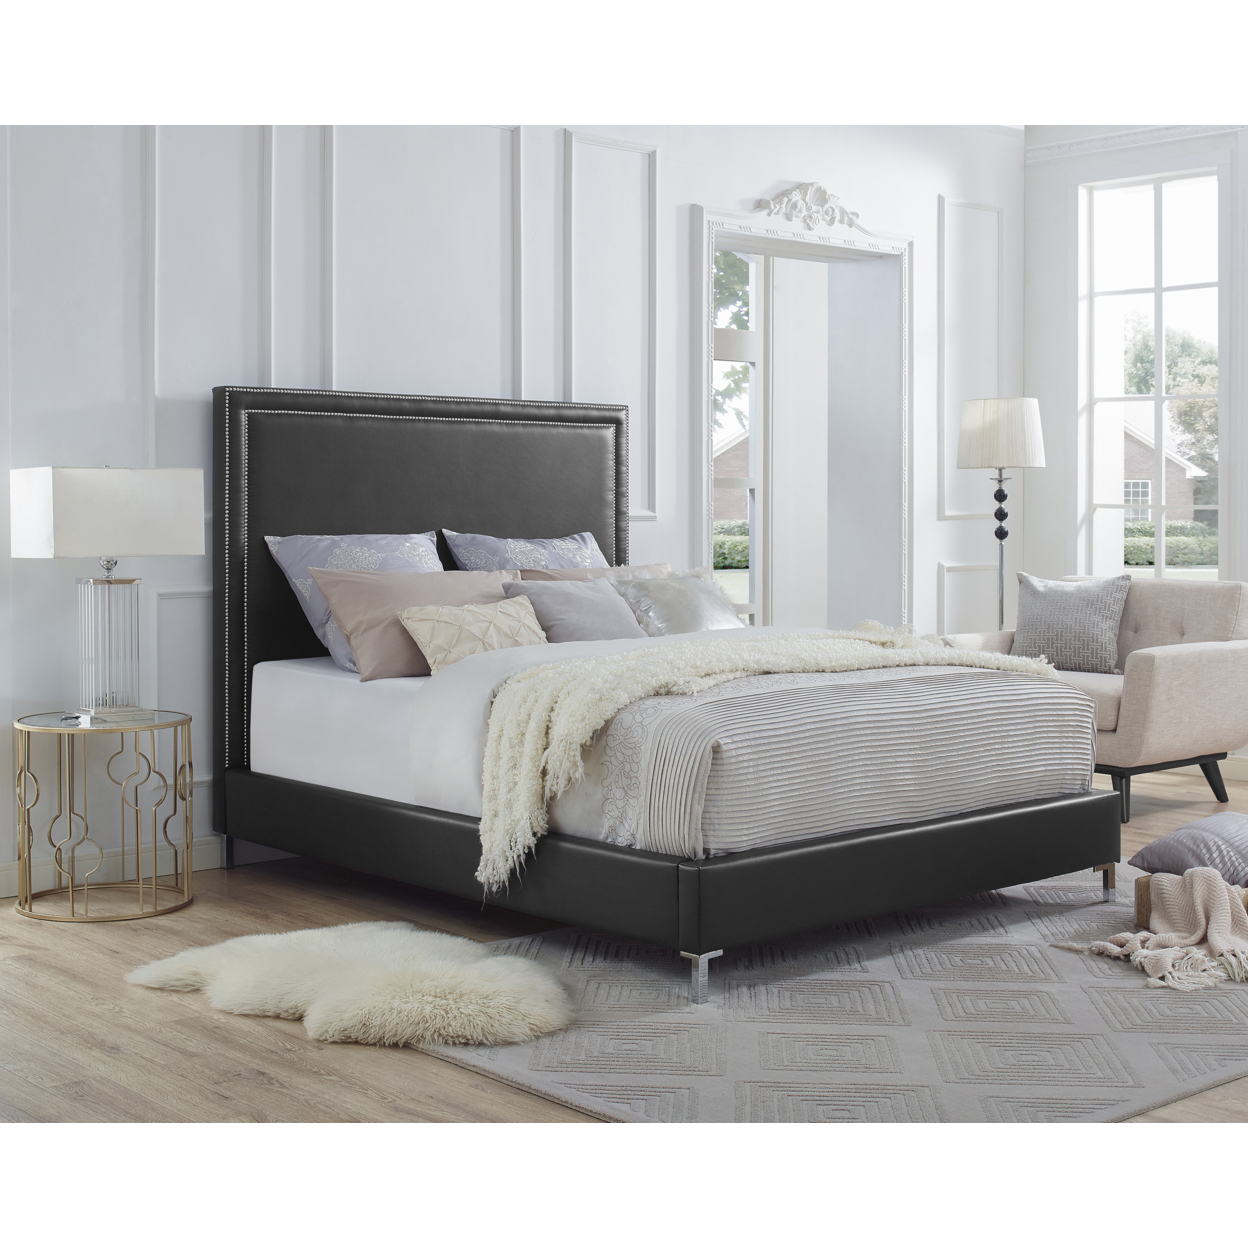 Valentina Leather PU Platform Bedframe-Nailhead Trim-King- Queen- Full- Twin Size-Inspired Home - White, Full